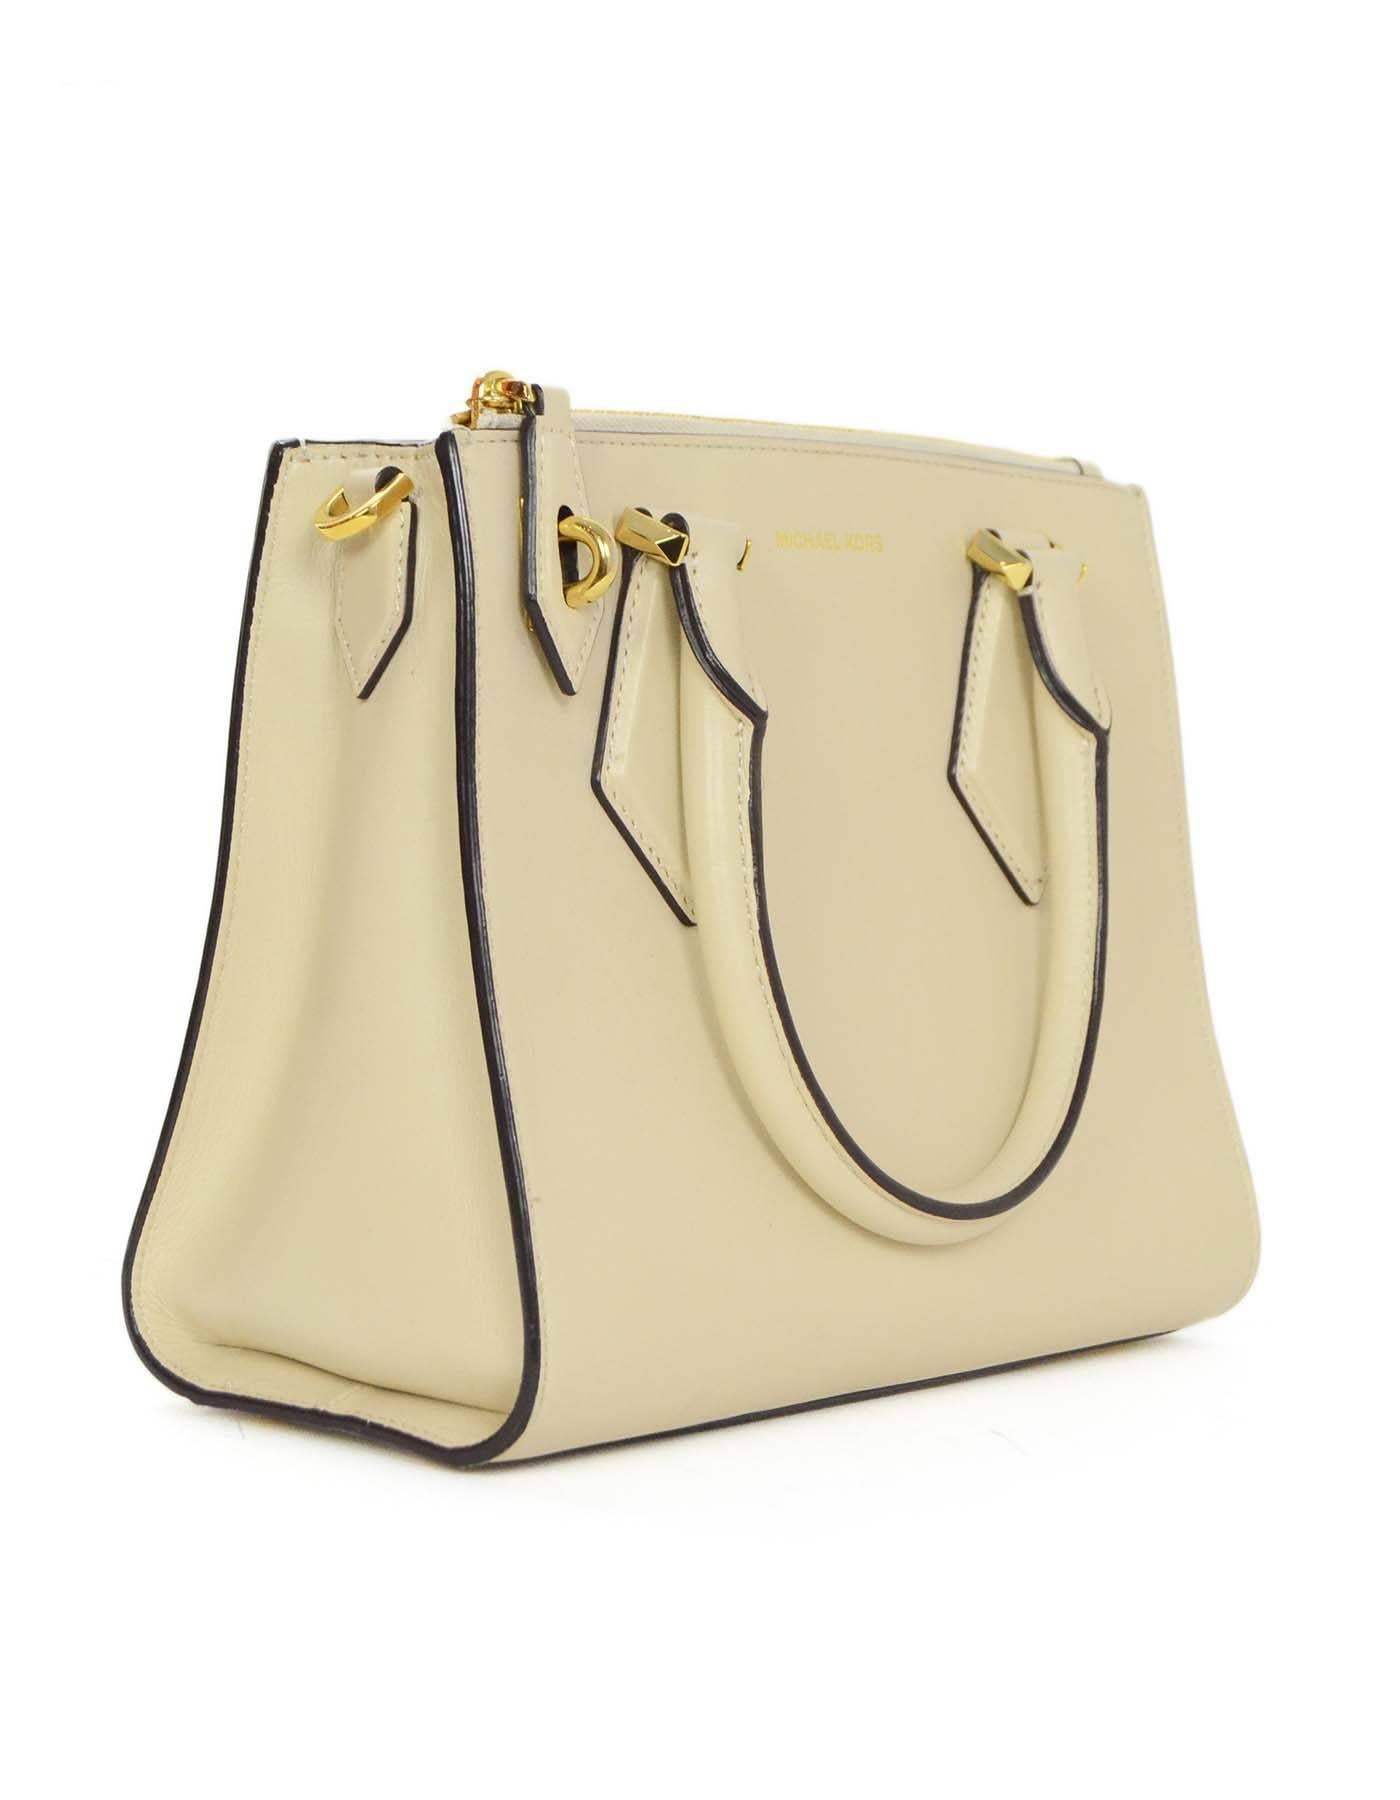 Michael Kors Vanilla Small Casey Satchel 
Features detachable crossbody strap
Made In: China
Color: Vanilla (cream)
Hardware: Goldtone
Materials: Leather
Lining: Gold satin
Closure/Opening: Open top
Exterior Pockets: One zipper pocket at front panel